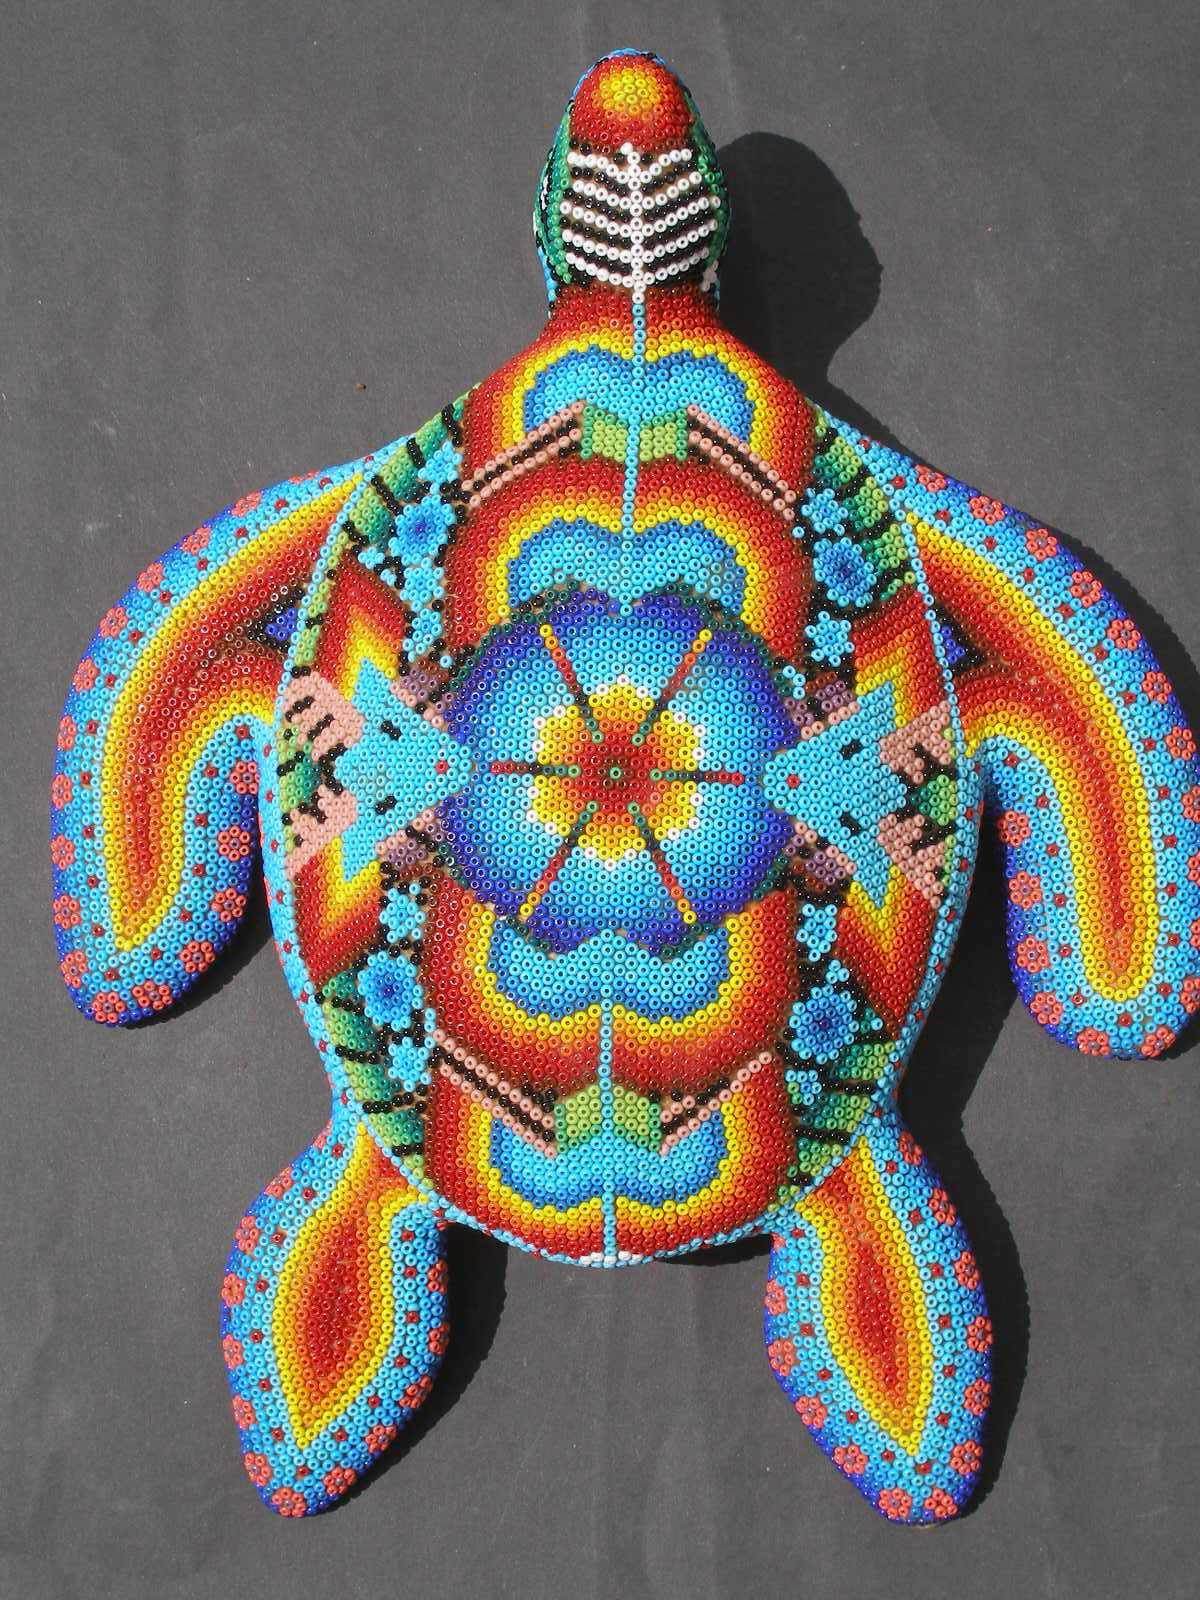 Huichols – Unkown Bead Artists from Mexico | Beads, Artist and Craft